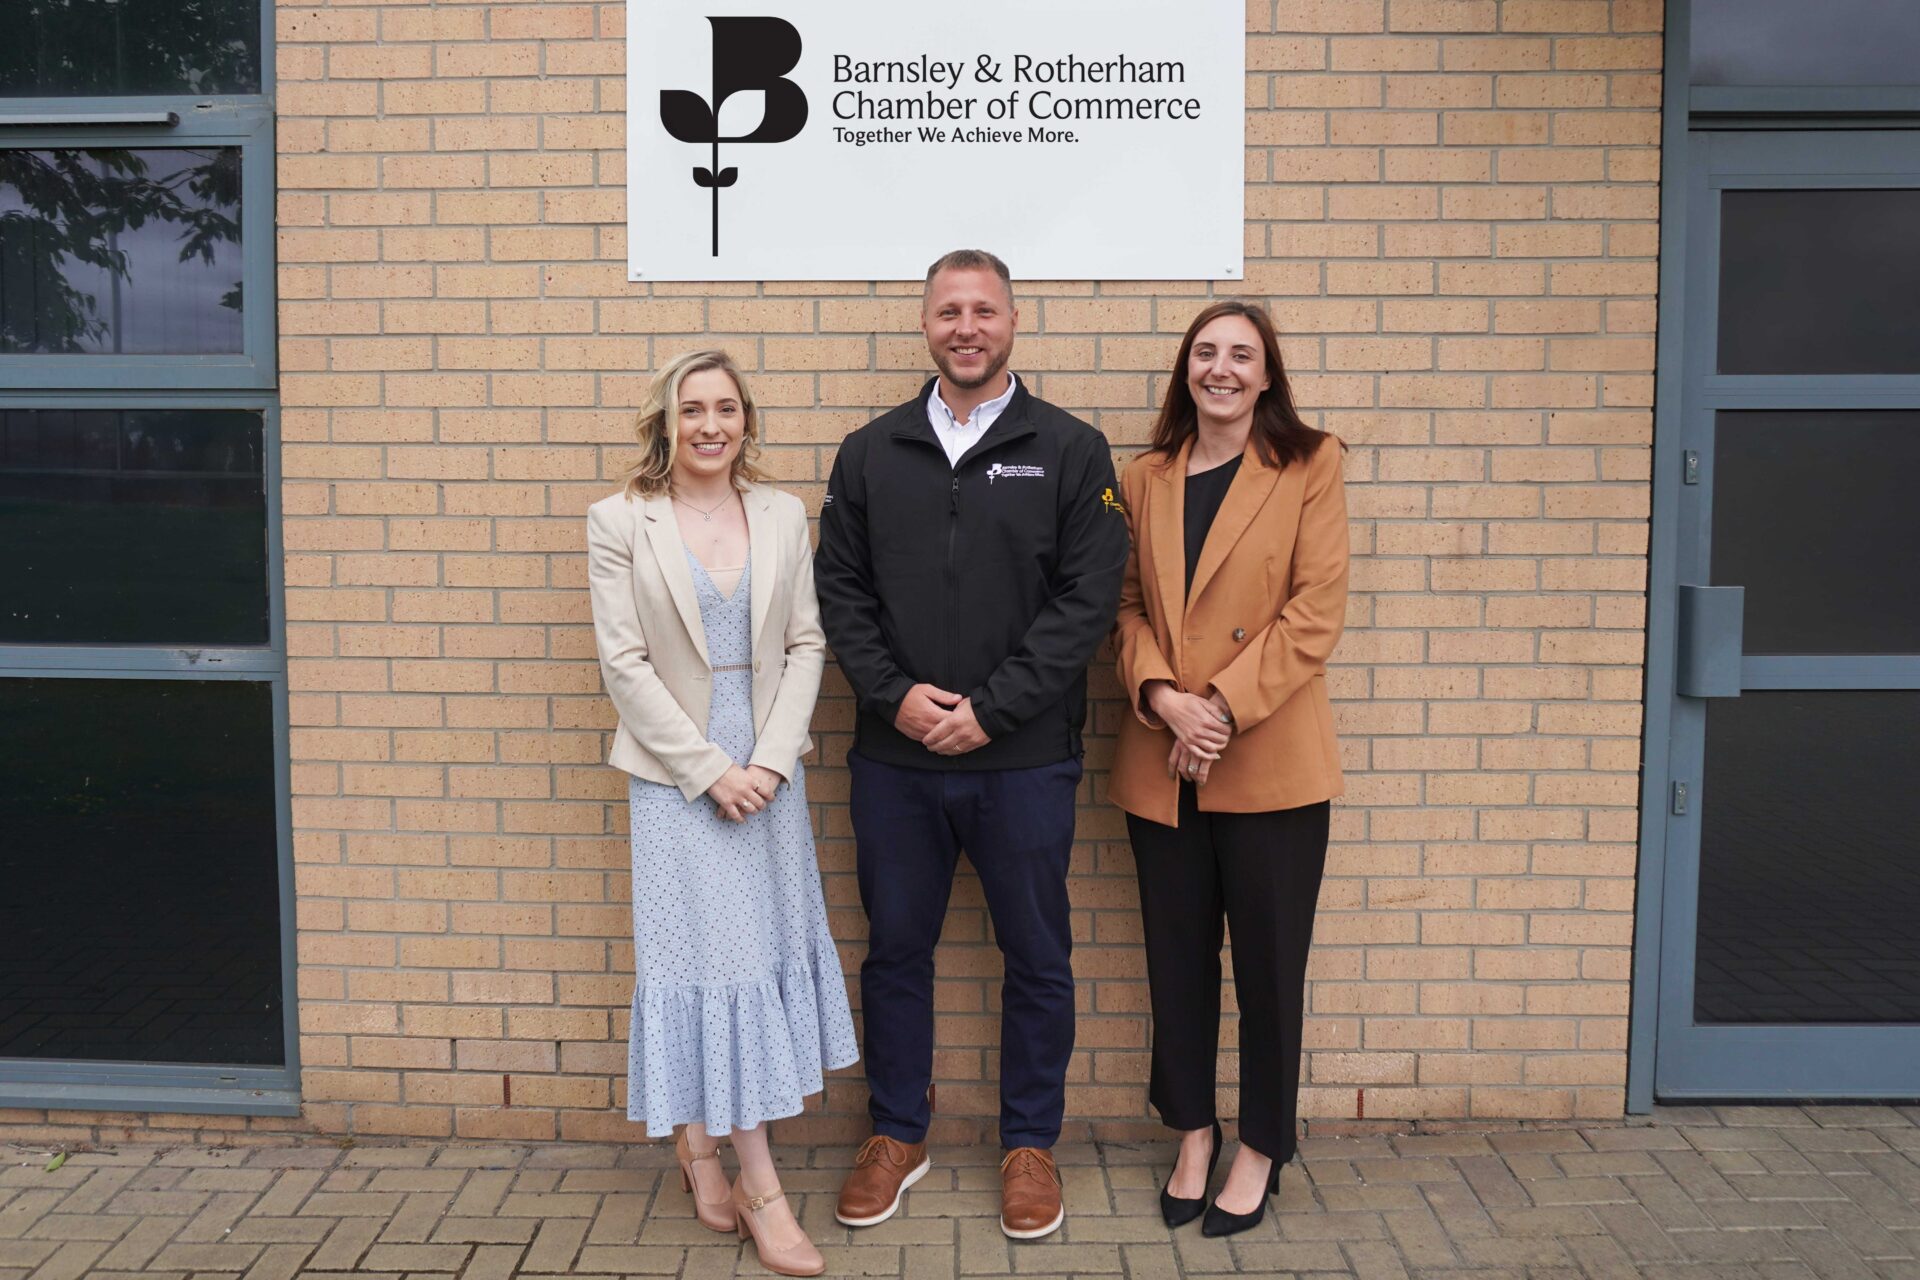 Esh Group joins Barnsley & Rotherham Chamber of Commerce as latest member